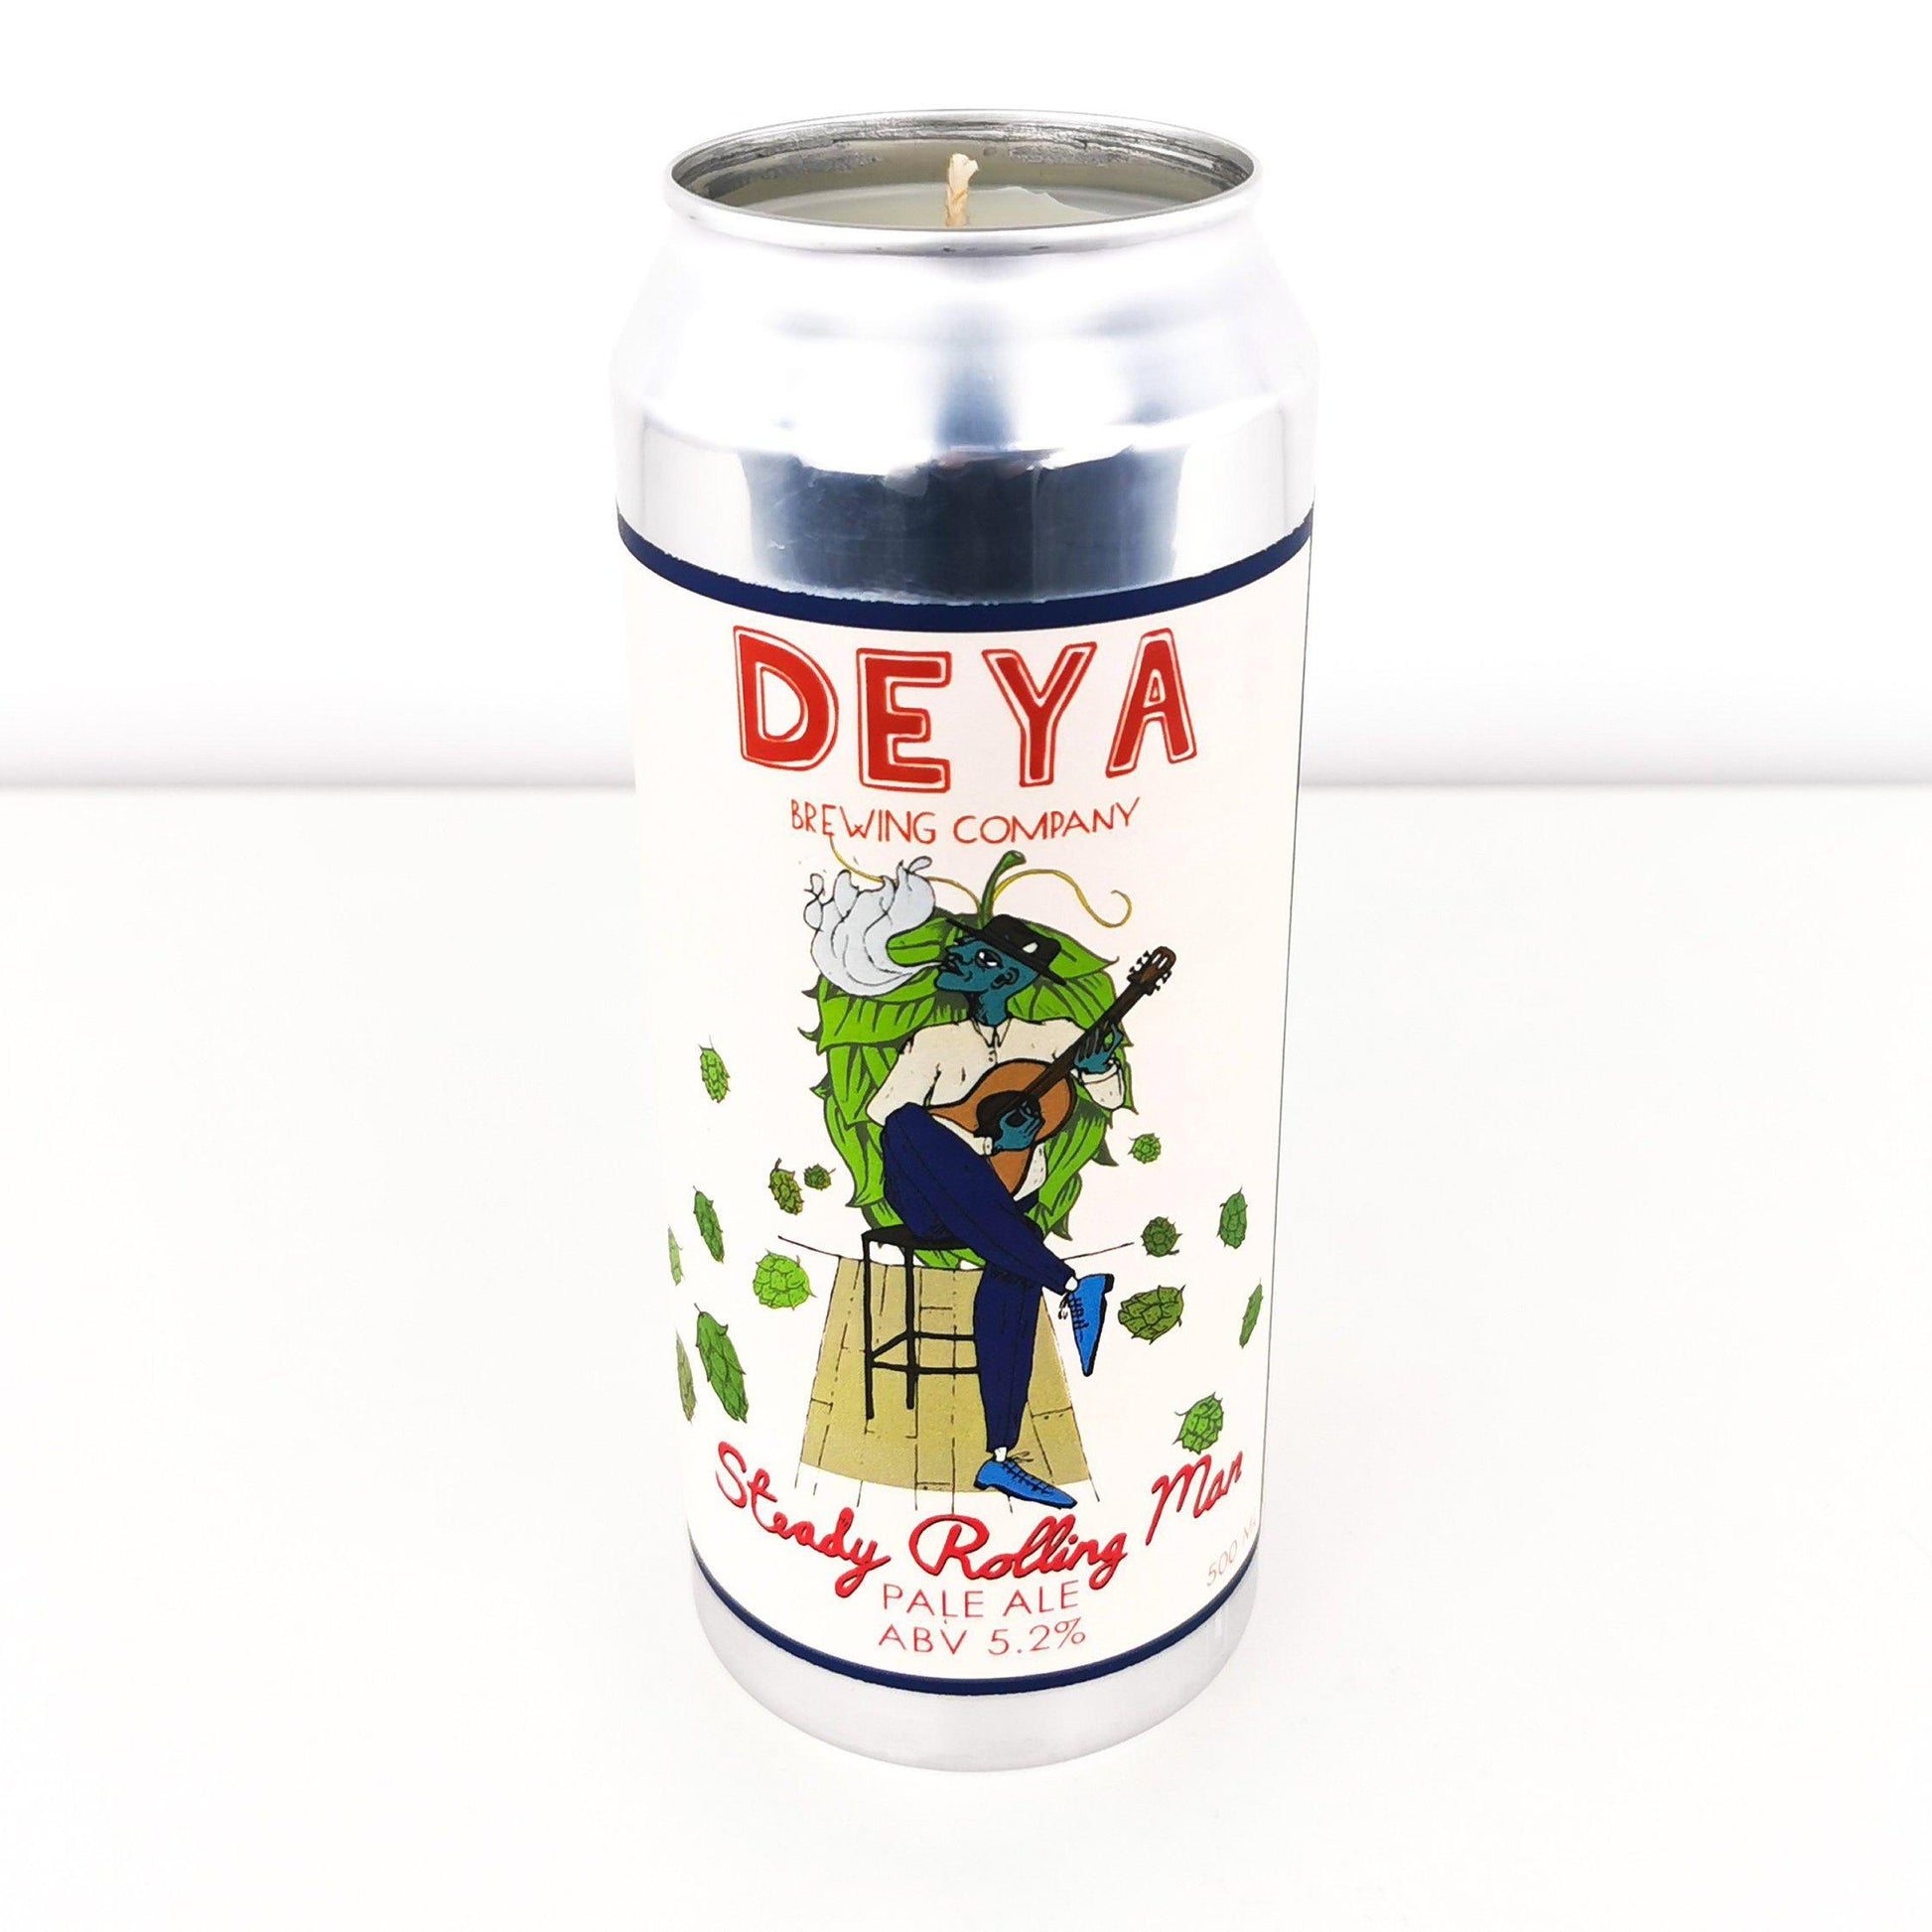 Steady Rolling Man DEYA Craft Beer Can Candle Beer Can Candles Adhock Homeware